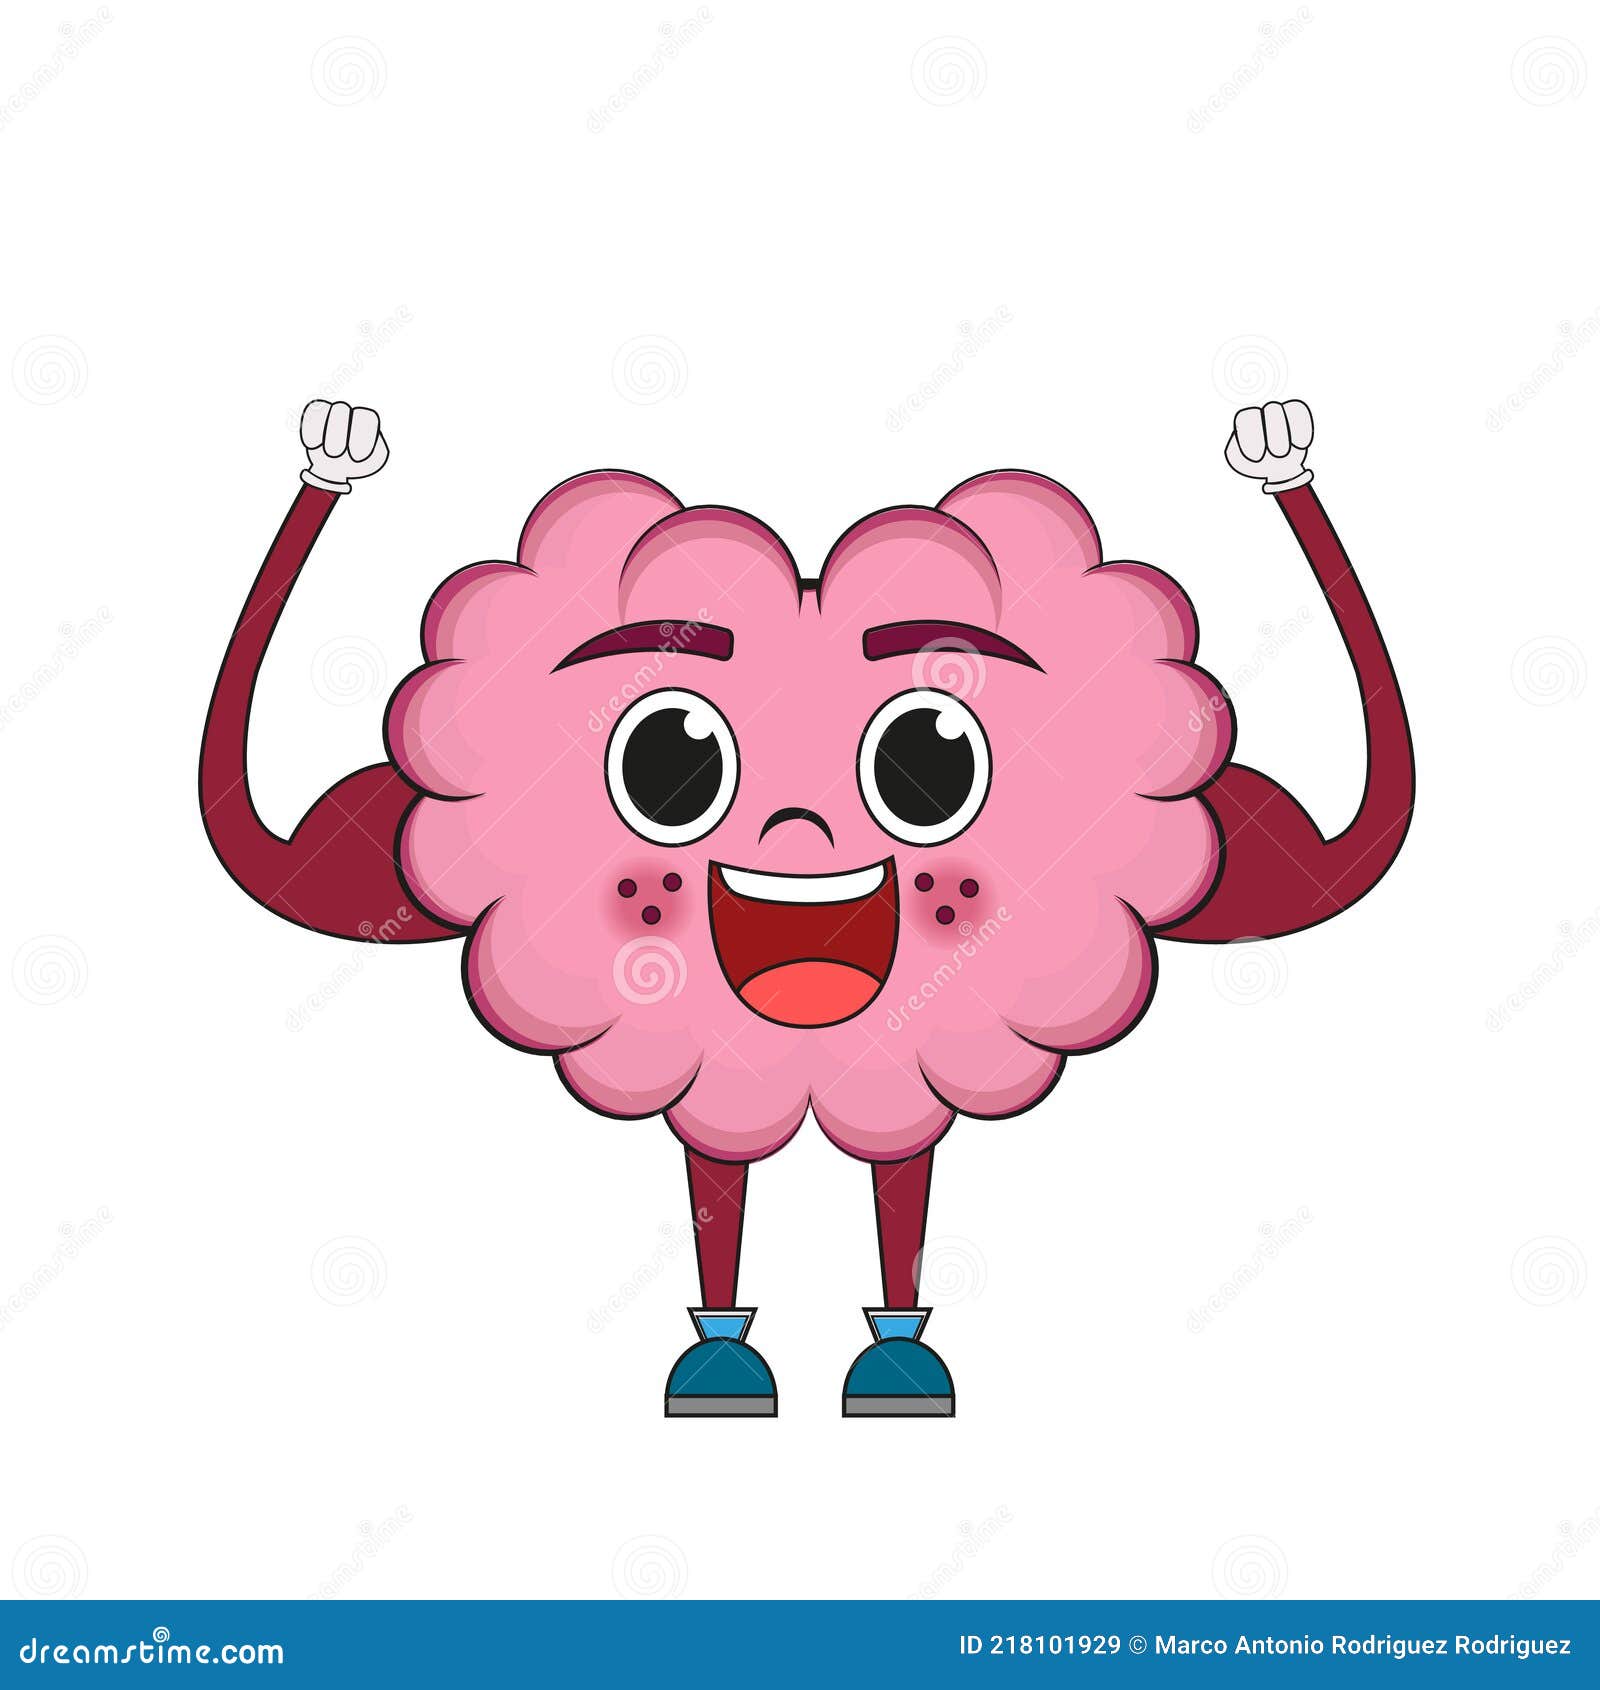 Isolated Cartoon of a Strong Brain Stock Vector - Illustration of healthy,  organ: 218101929